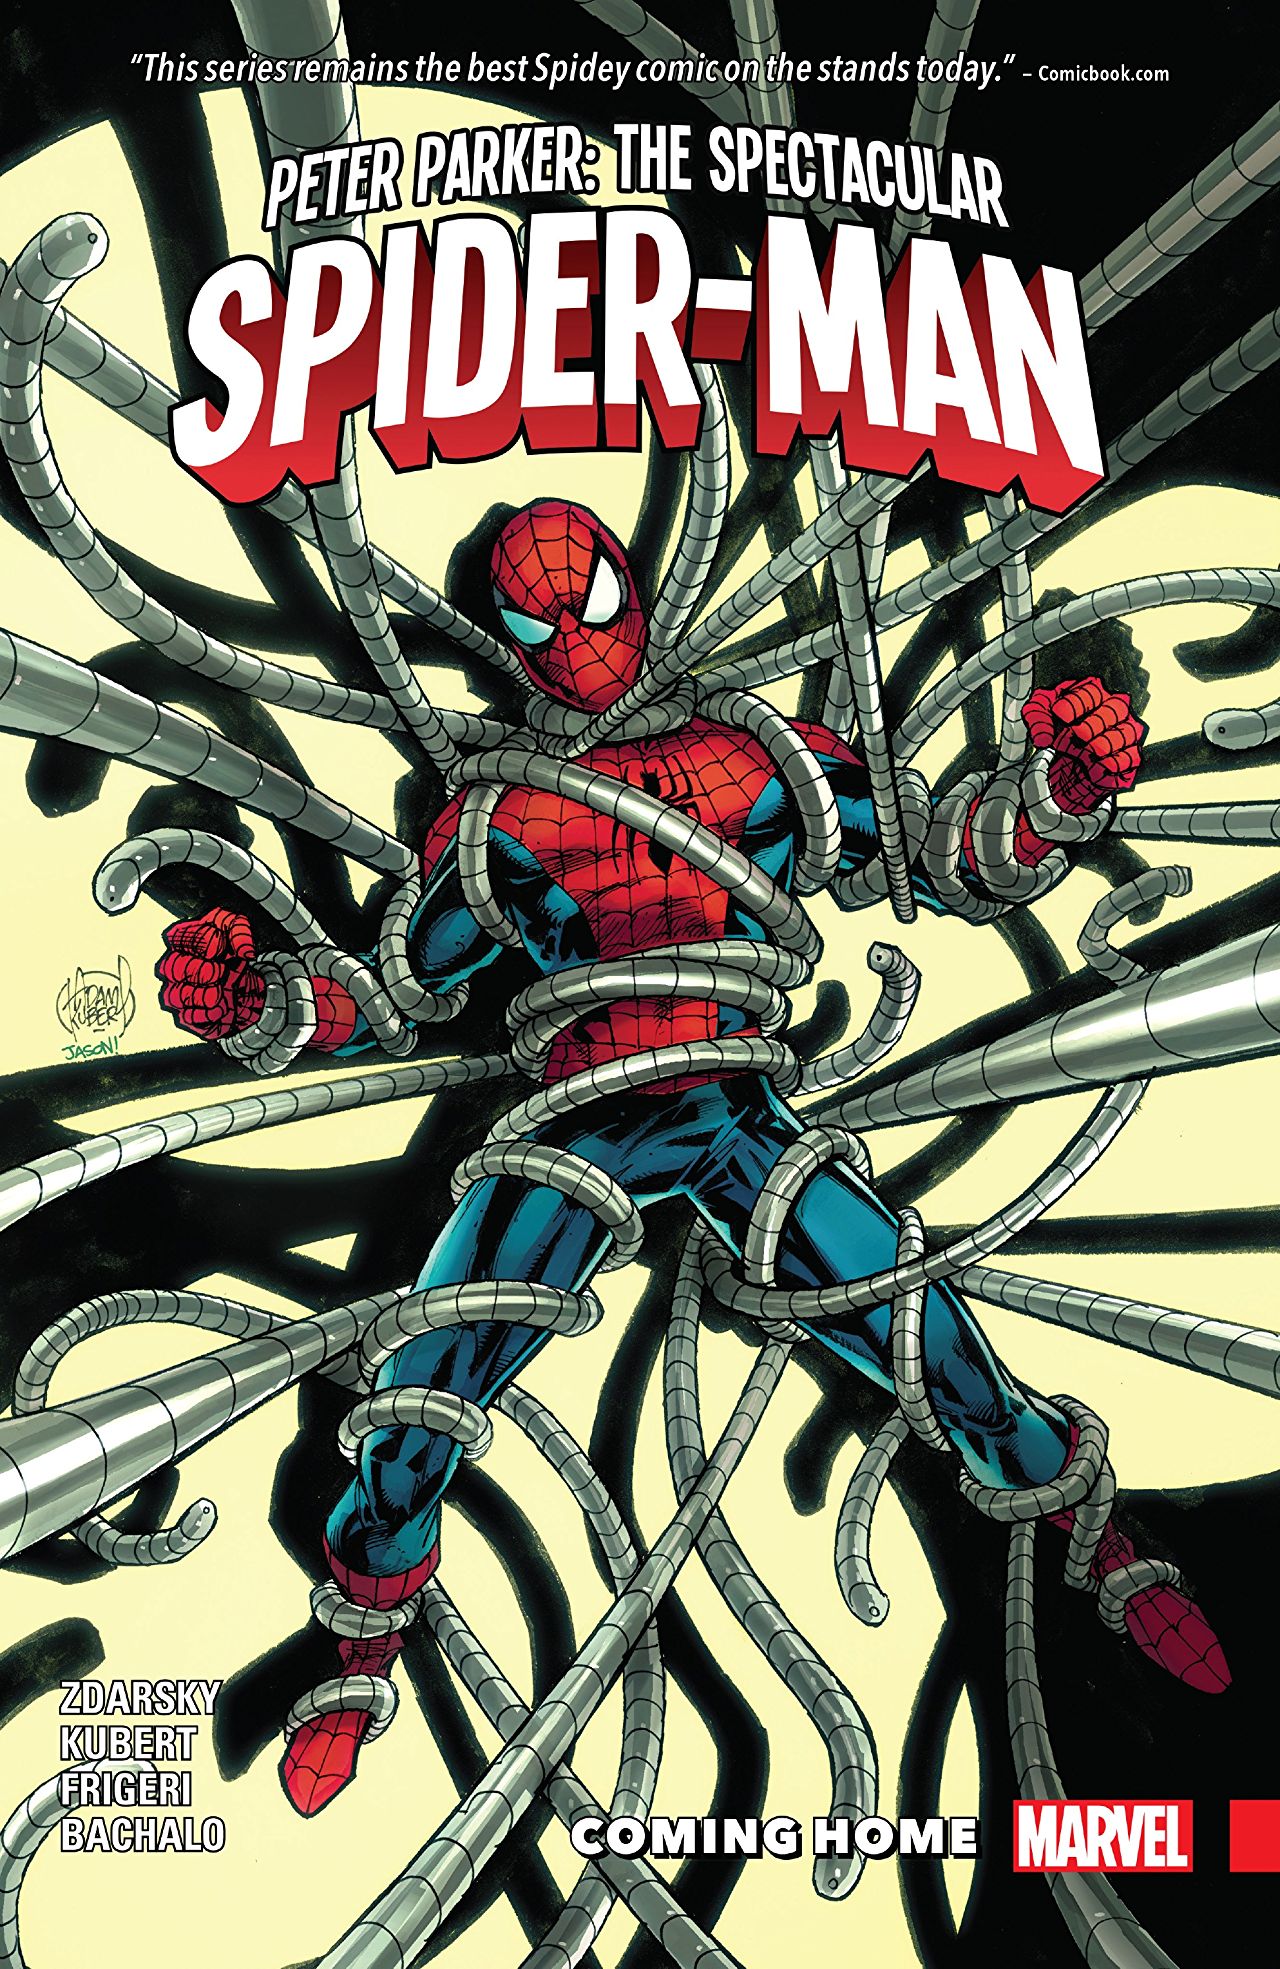 'Peter Parker: The Spectacular Spider-Man Vol. 4: Coming Home' Review